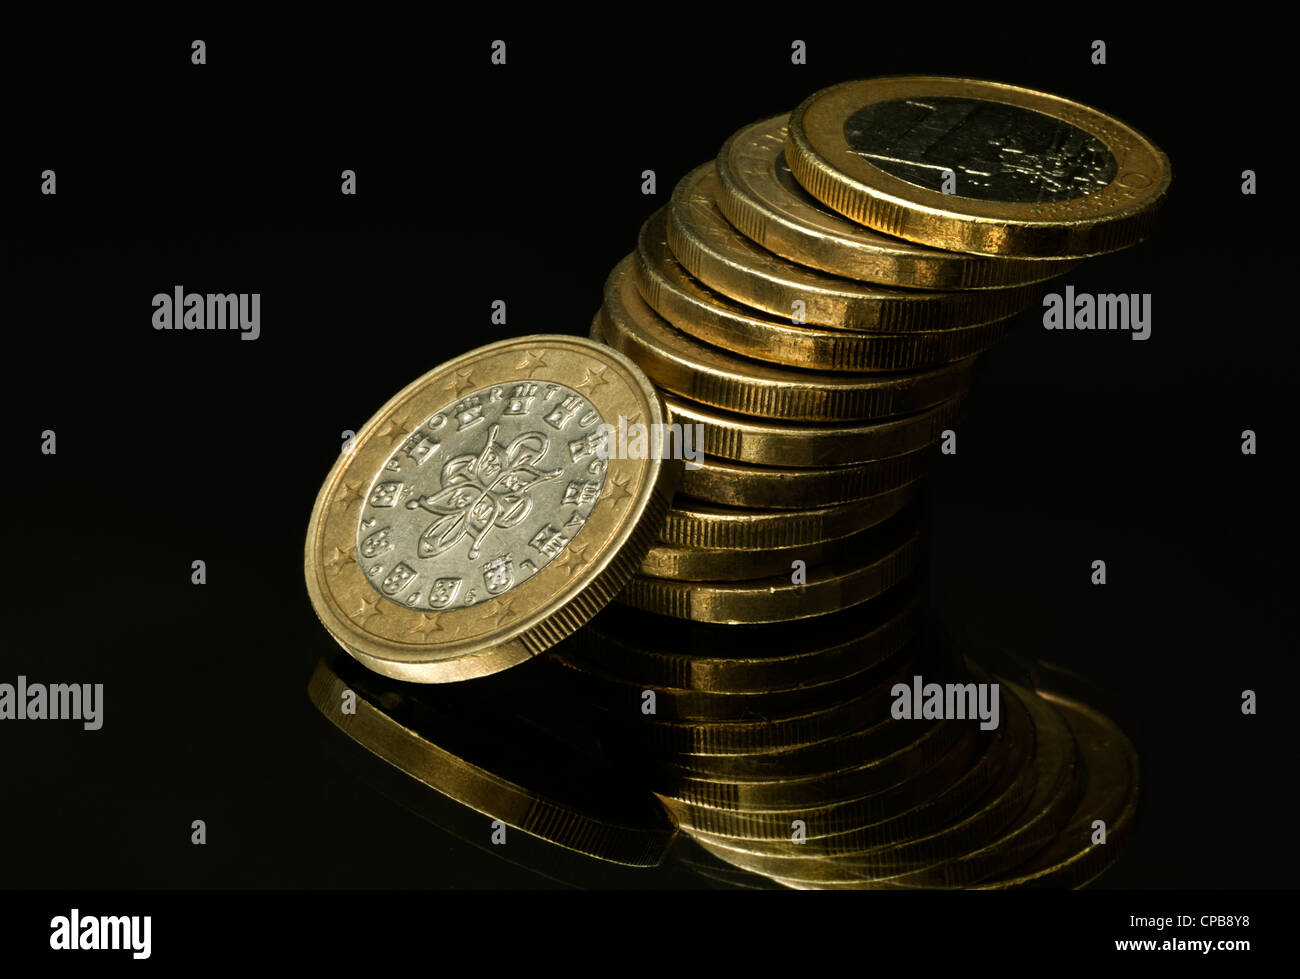 currency devaluation Portuguese Euro Euroabwertung currency devaluation Portugal Stock Photo